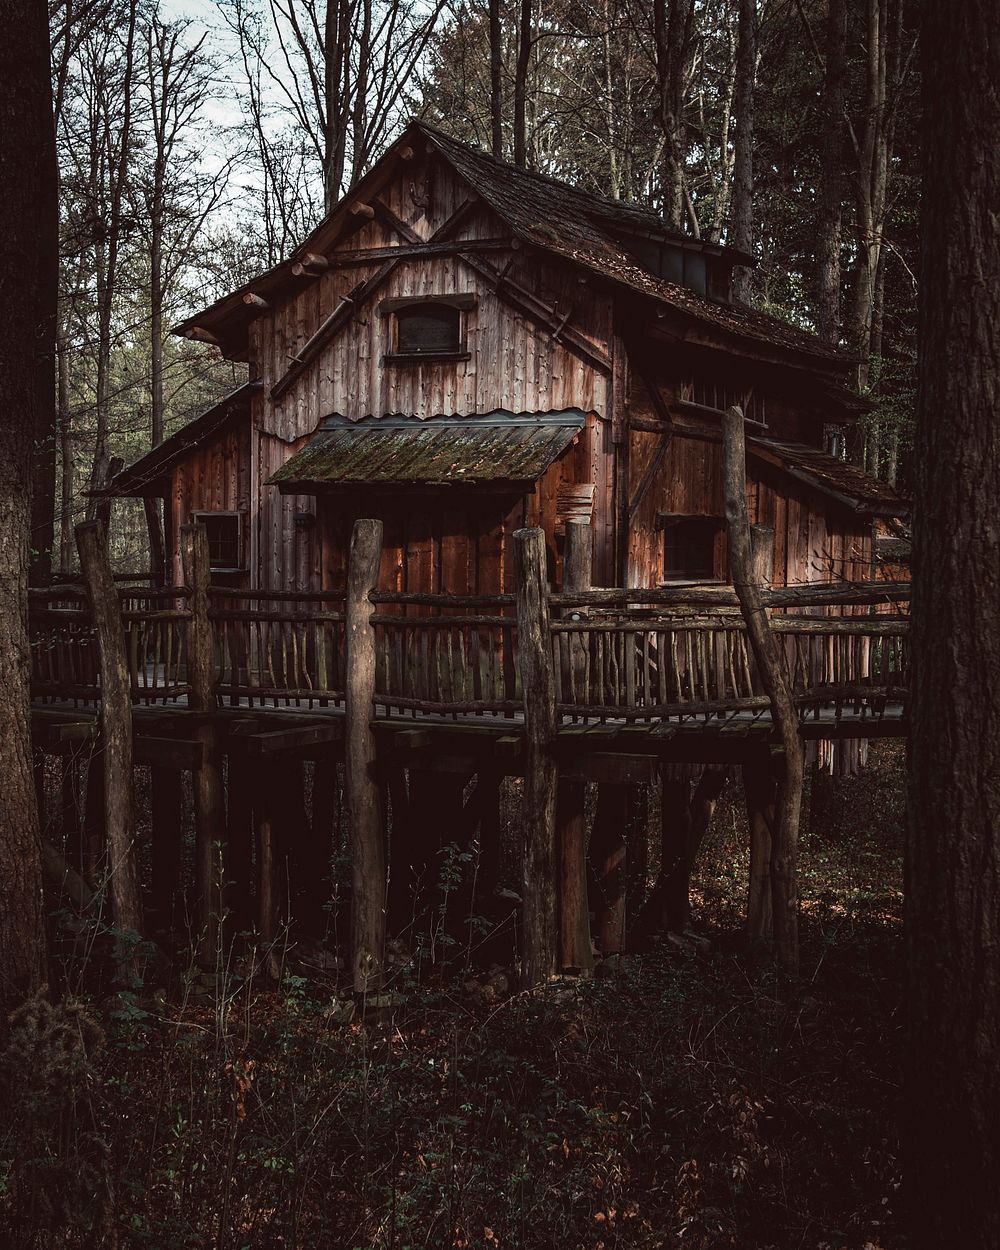 Old wooden house in Wildparadies Stromberg wildlife park, Germany